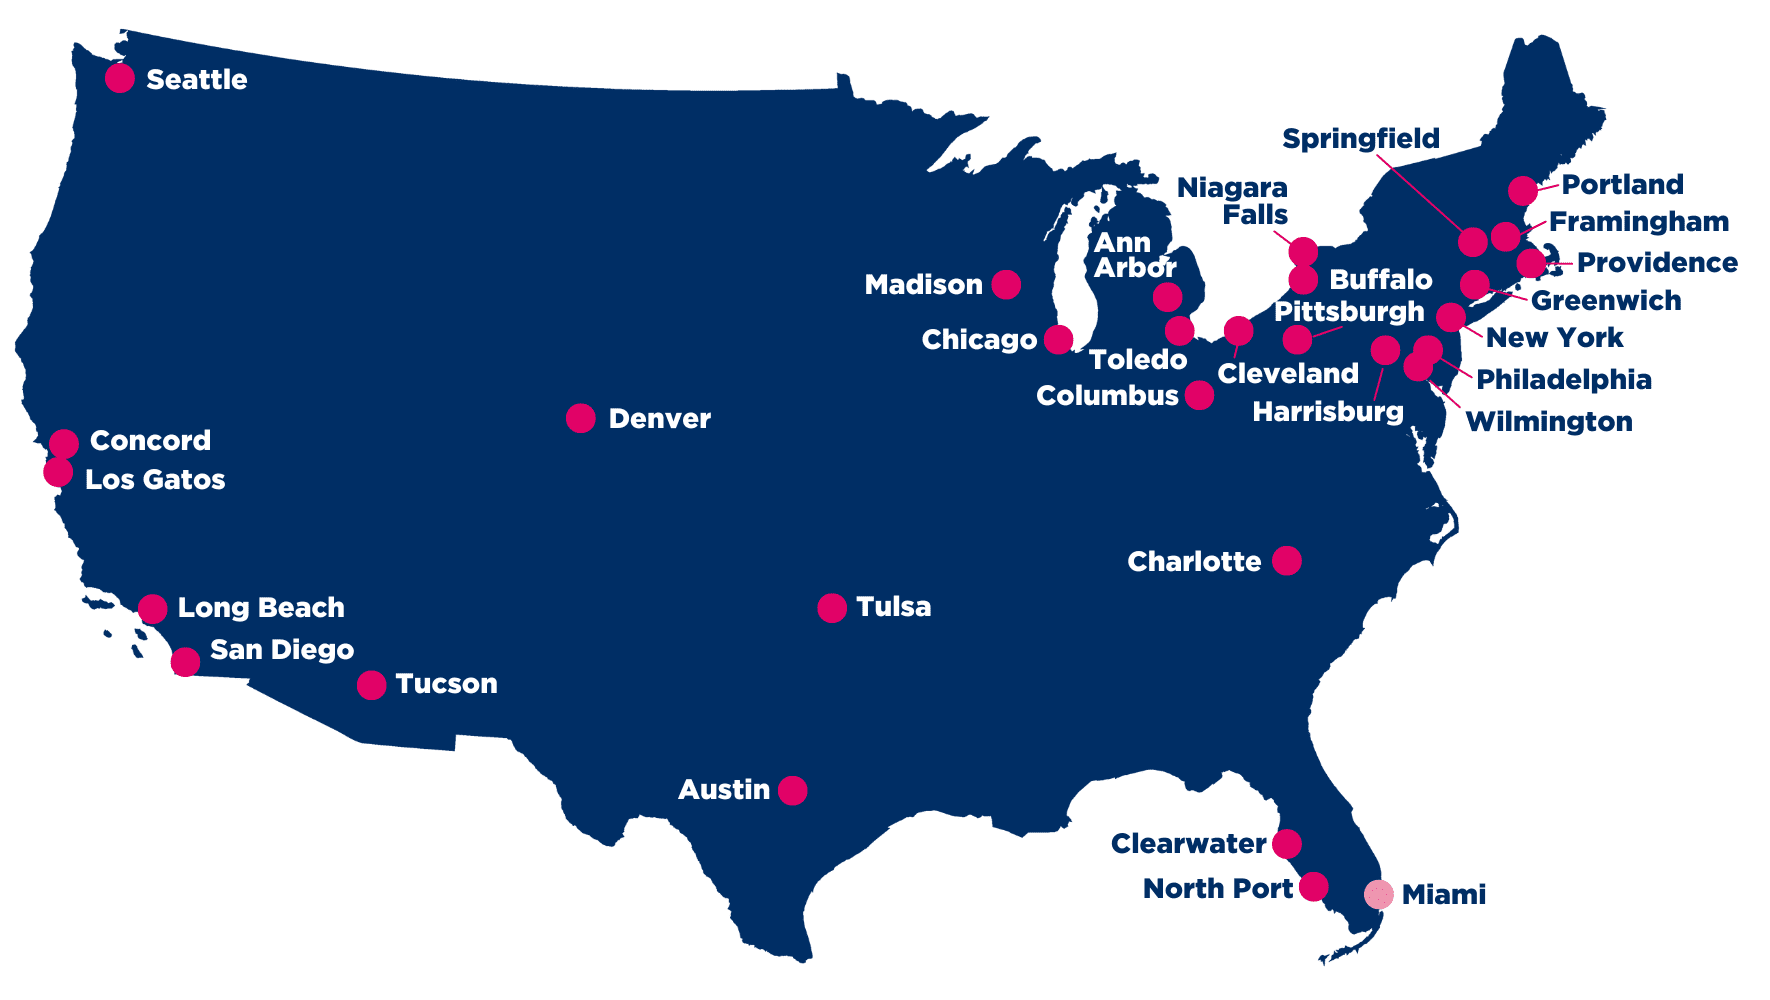 A Map of HIAS Resettlement Partners across the United States